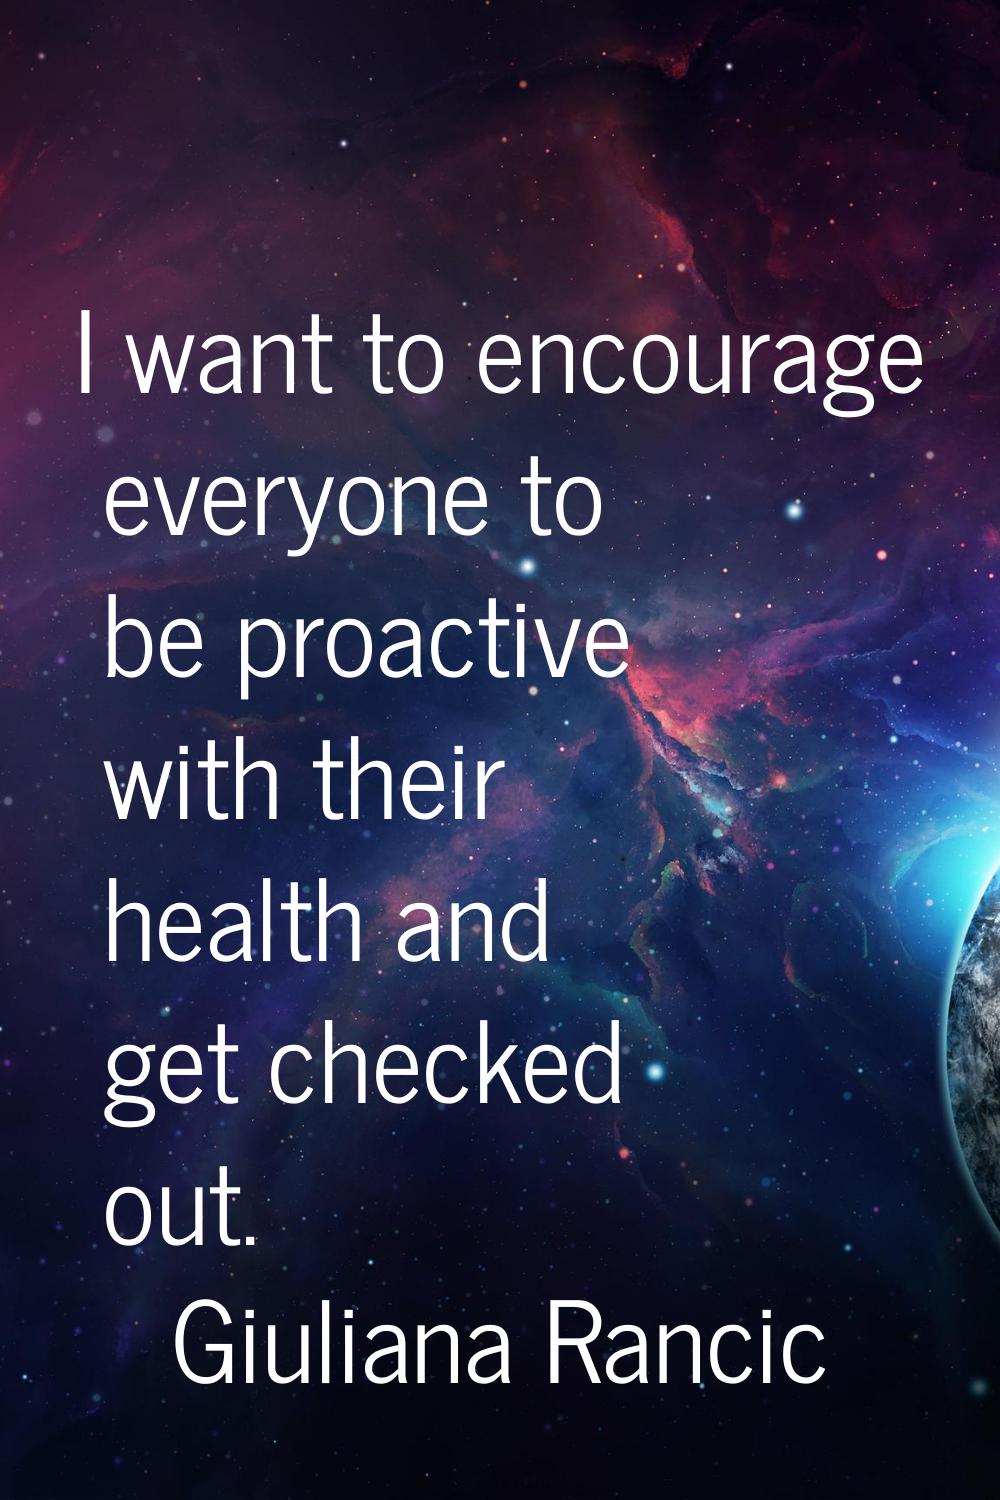 I want to encourage everyone to be proactive with their health and get checked out.